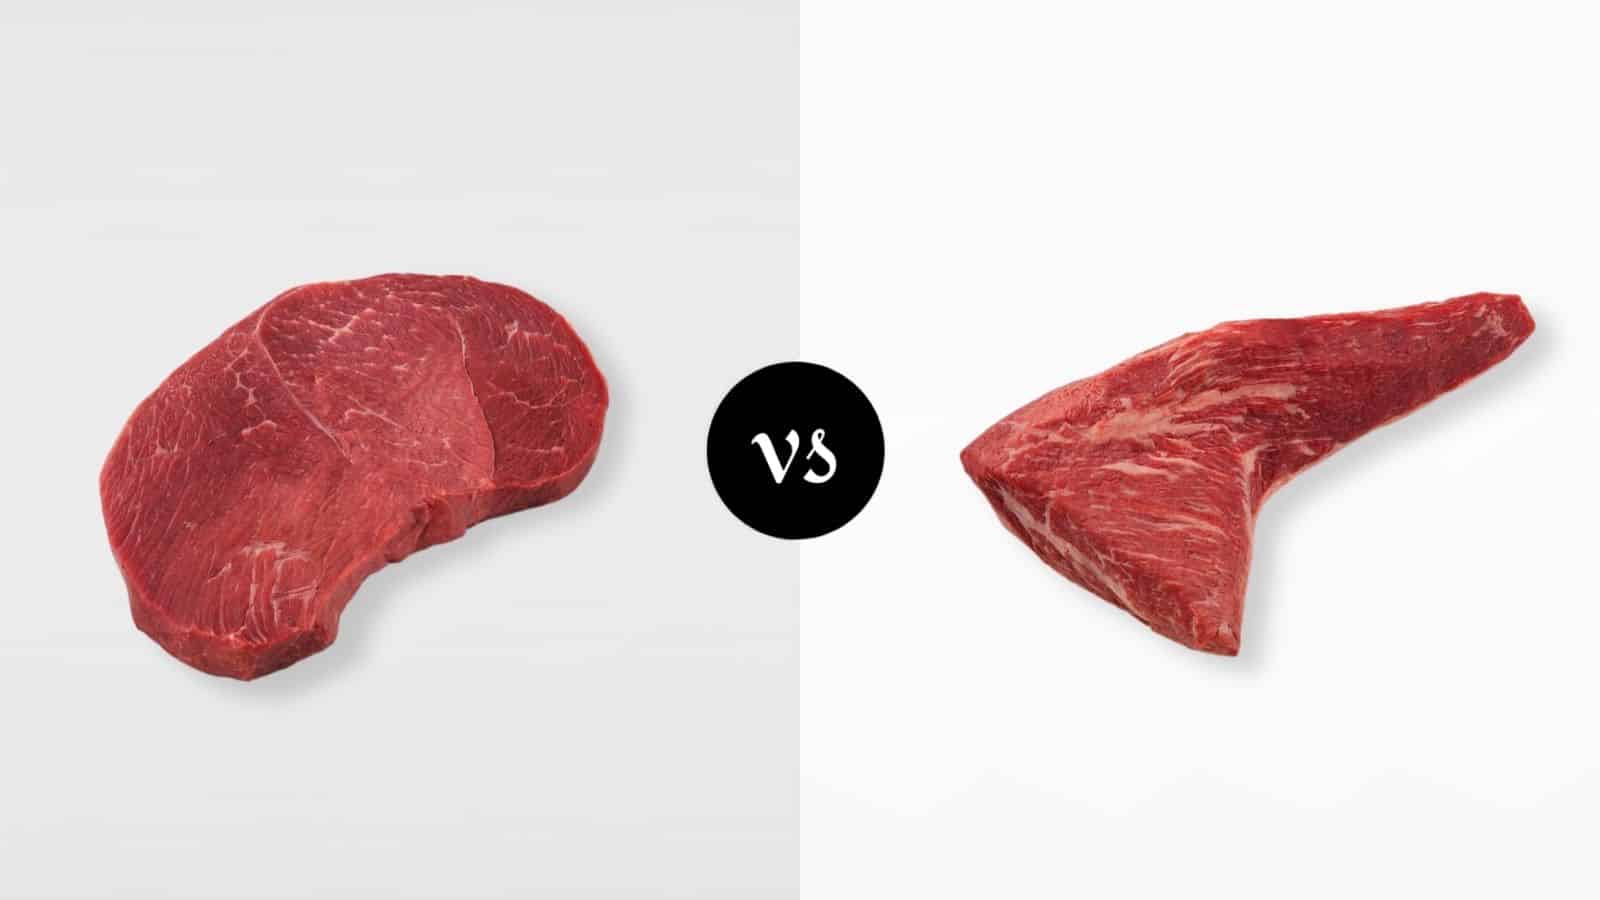 Sirloin Tip vs Tri-Tip: What's The Difference? - Miss Vickie